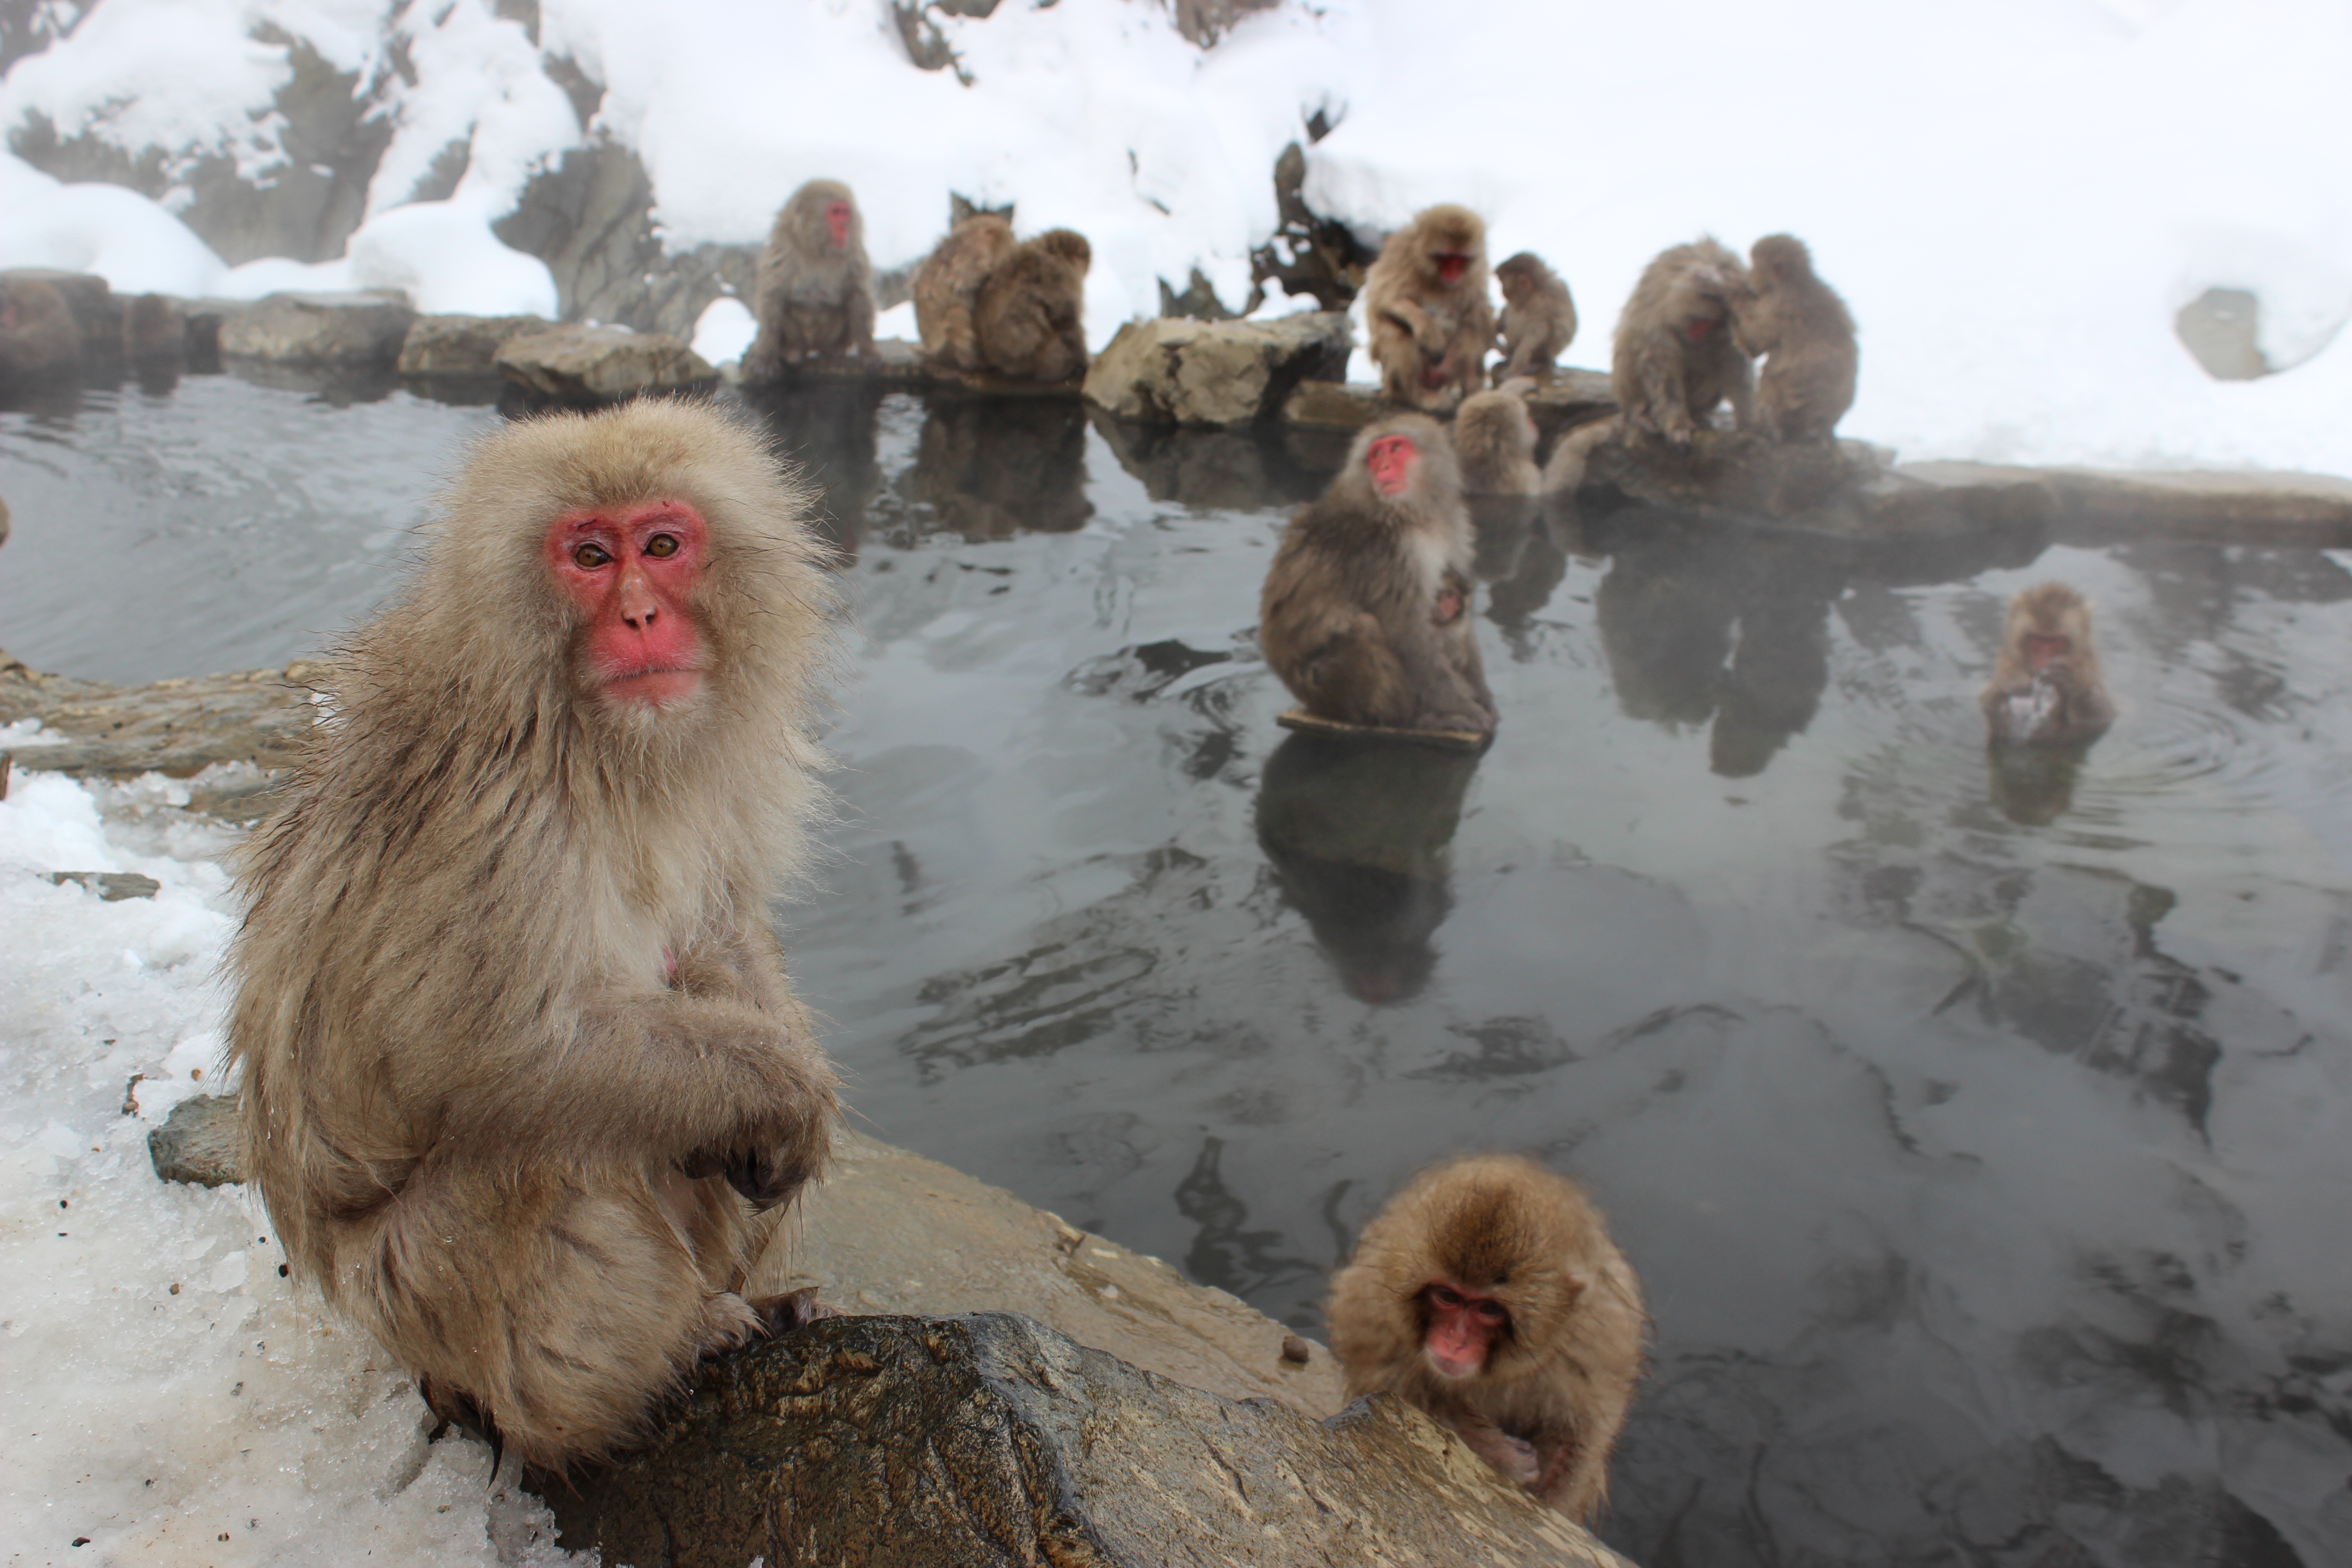 Japanese Macaque in Jigokudani Monkey Park Japan by andrew_t8